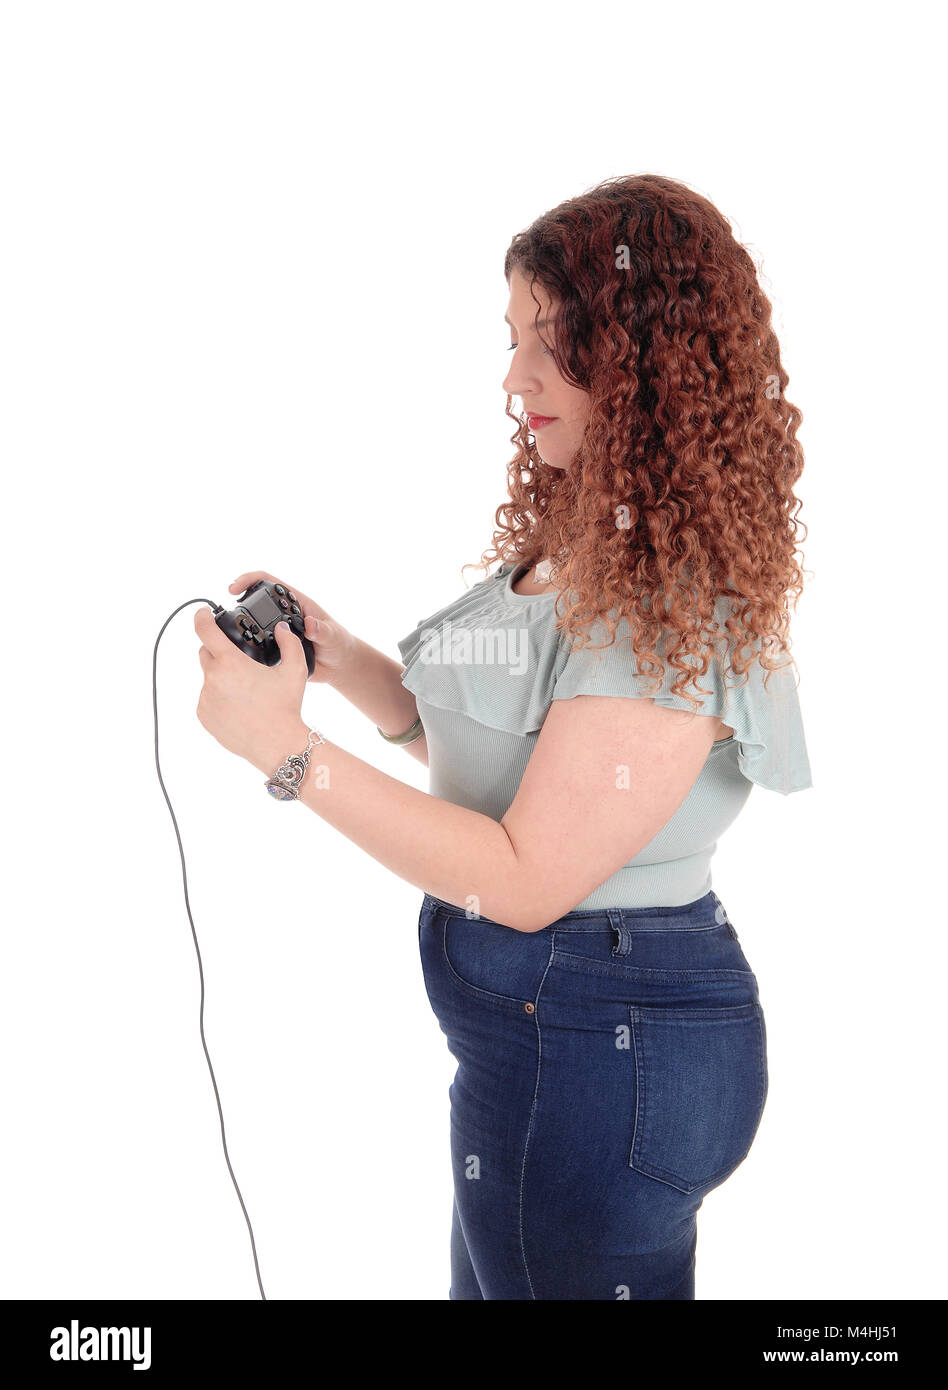 Woman playing her video game. Stock Photo